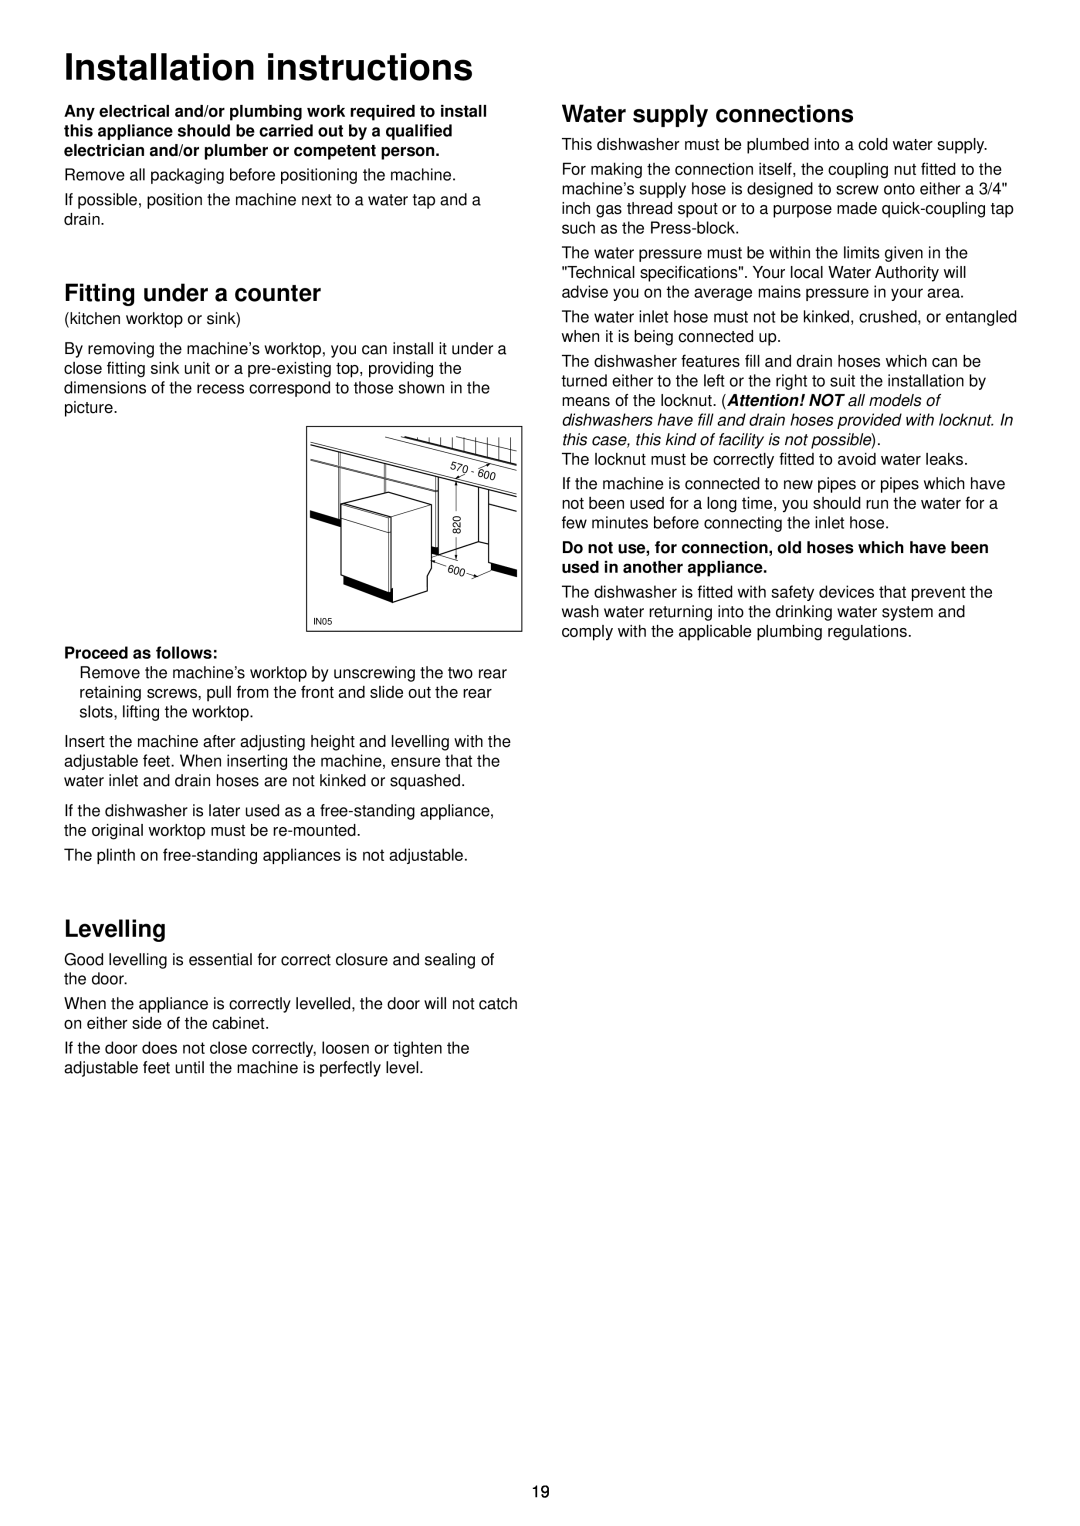 Zanussi DE 6554 manual Installation instructions, Fitting under a counter, Levelling, Water supply connections 